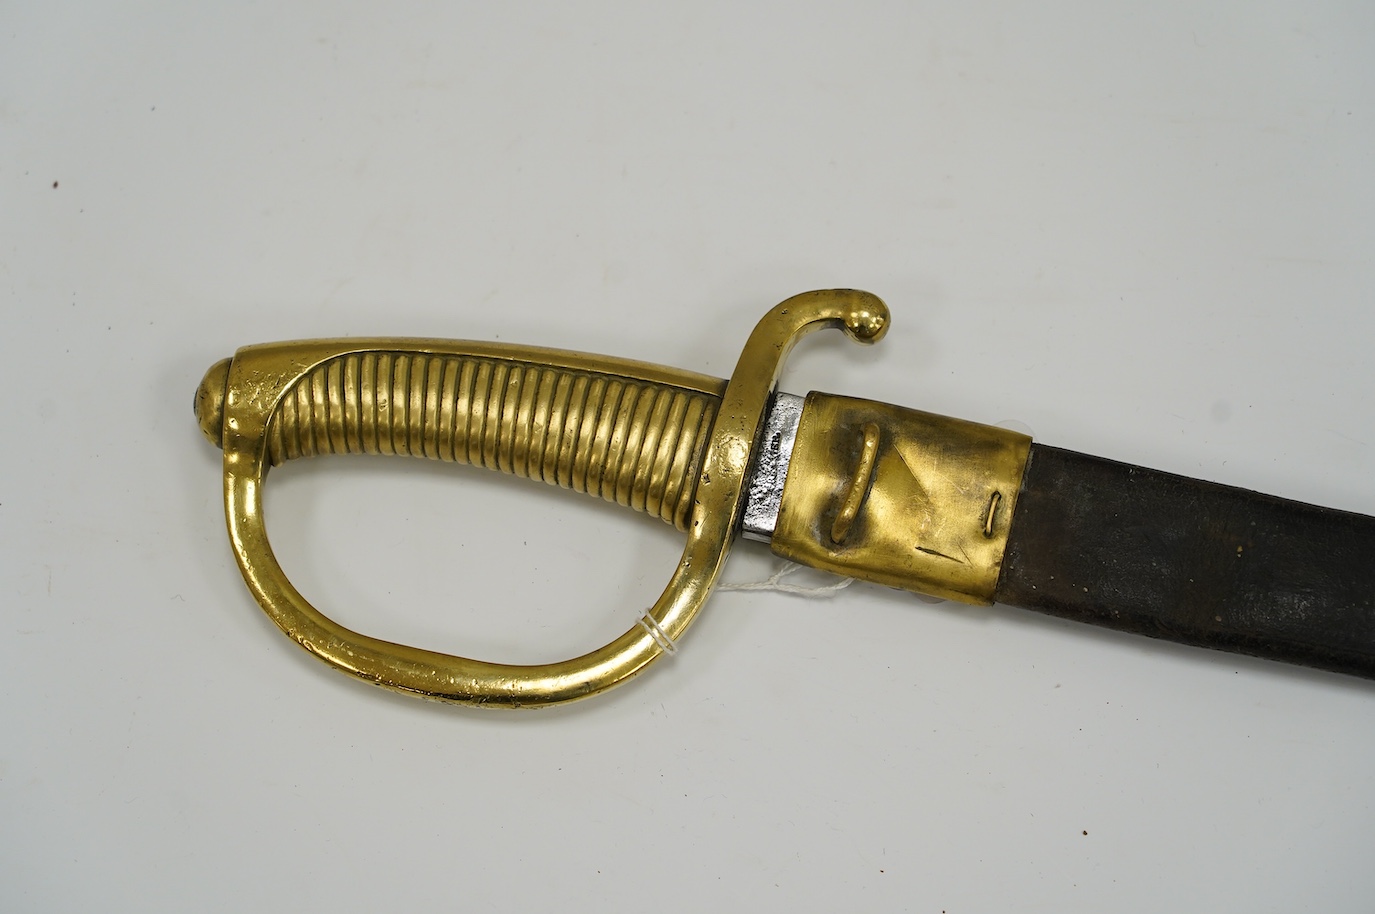 A French briquet cast D-shaped brass hilt in its brass mounted leather scabbard, blade 59.5cm. Condition - fair, blade heavily cleaned